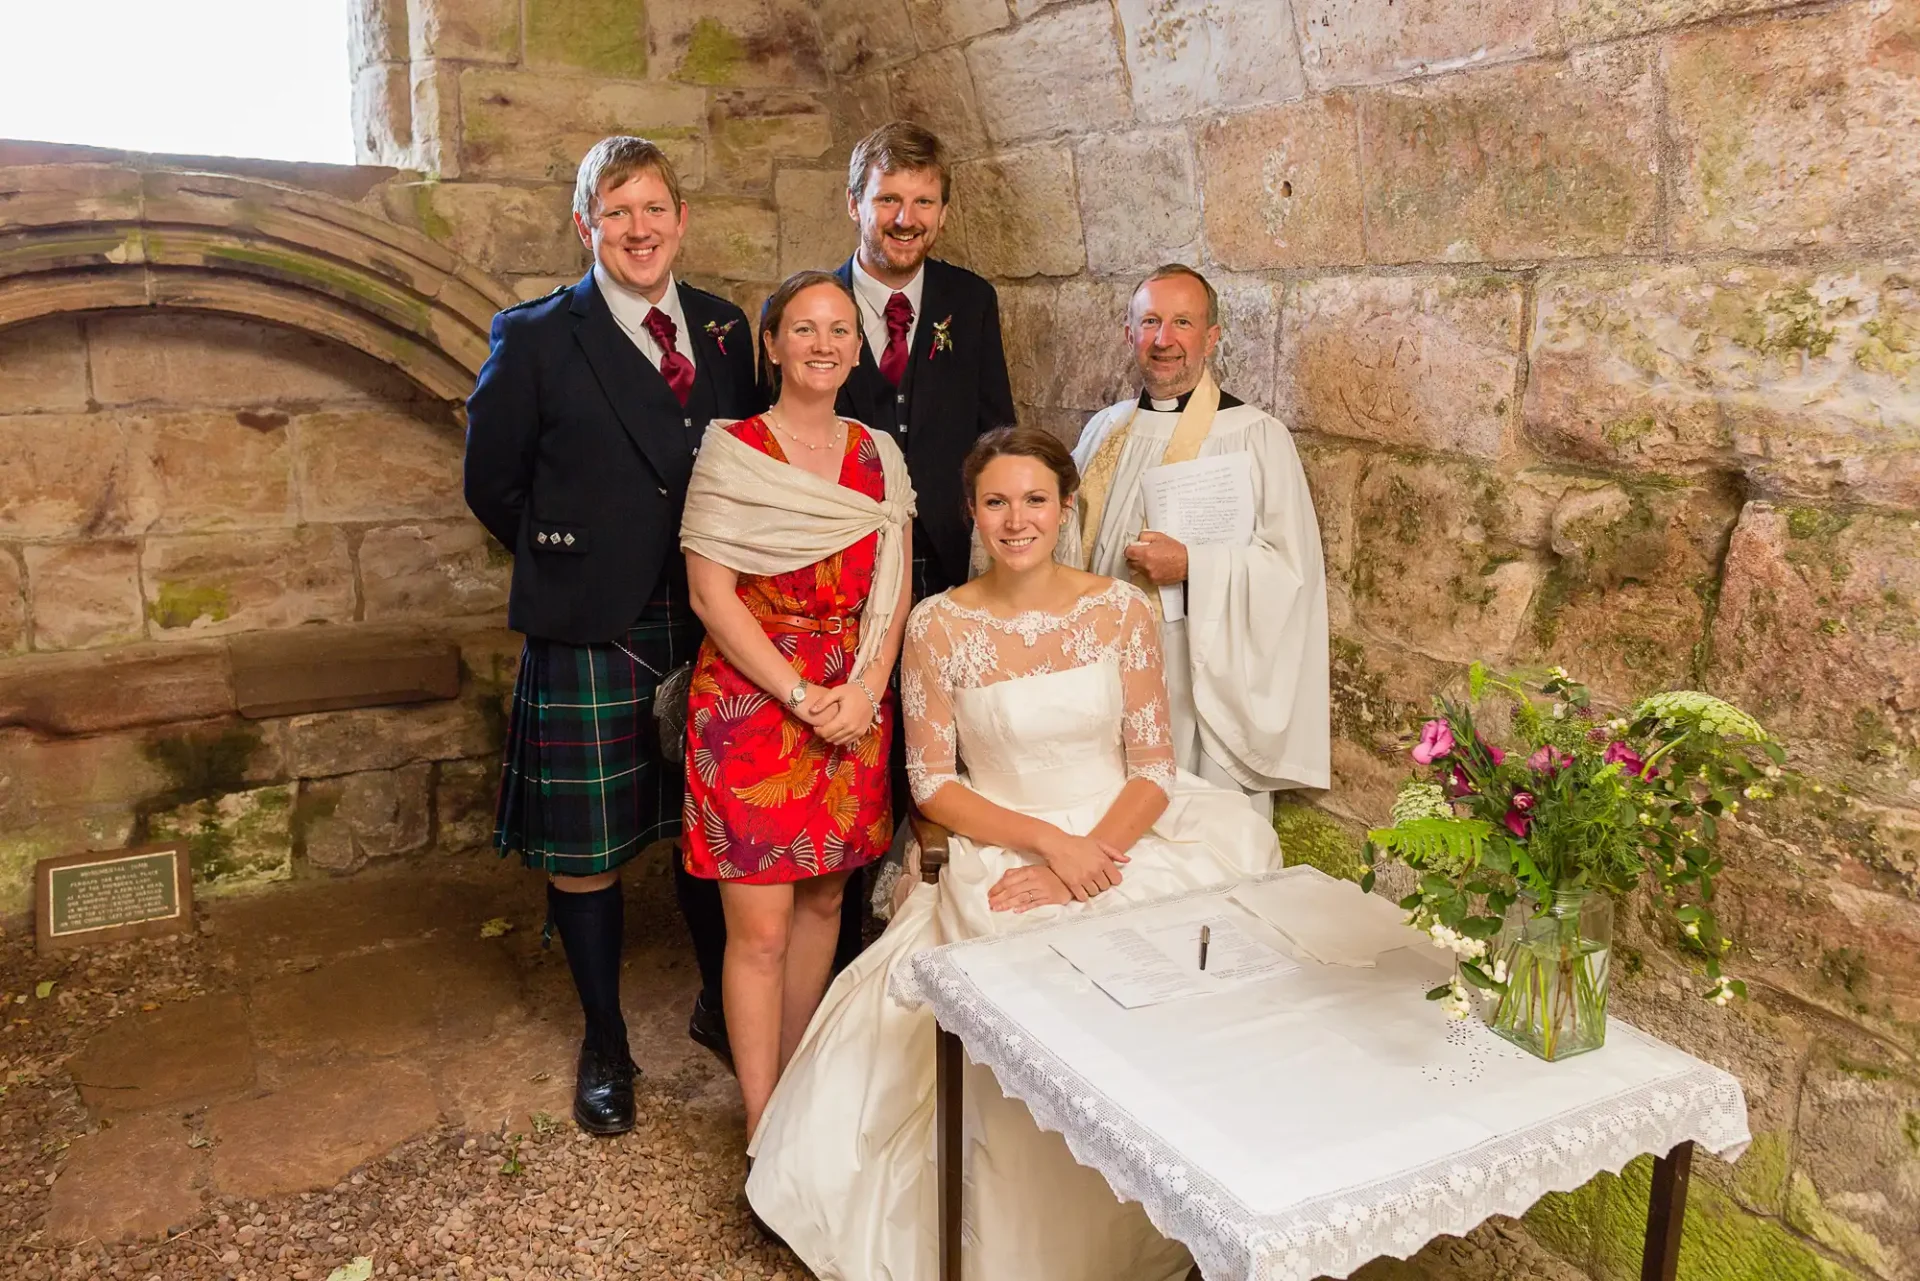 Five people, including a bride and groom, pose with a priest near a signing table adorned with flowers inside a historical stone building.